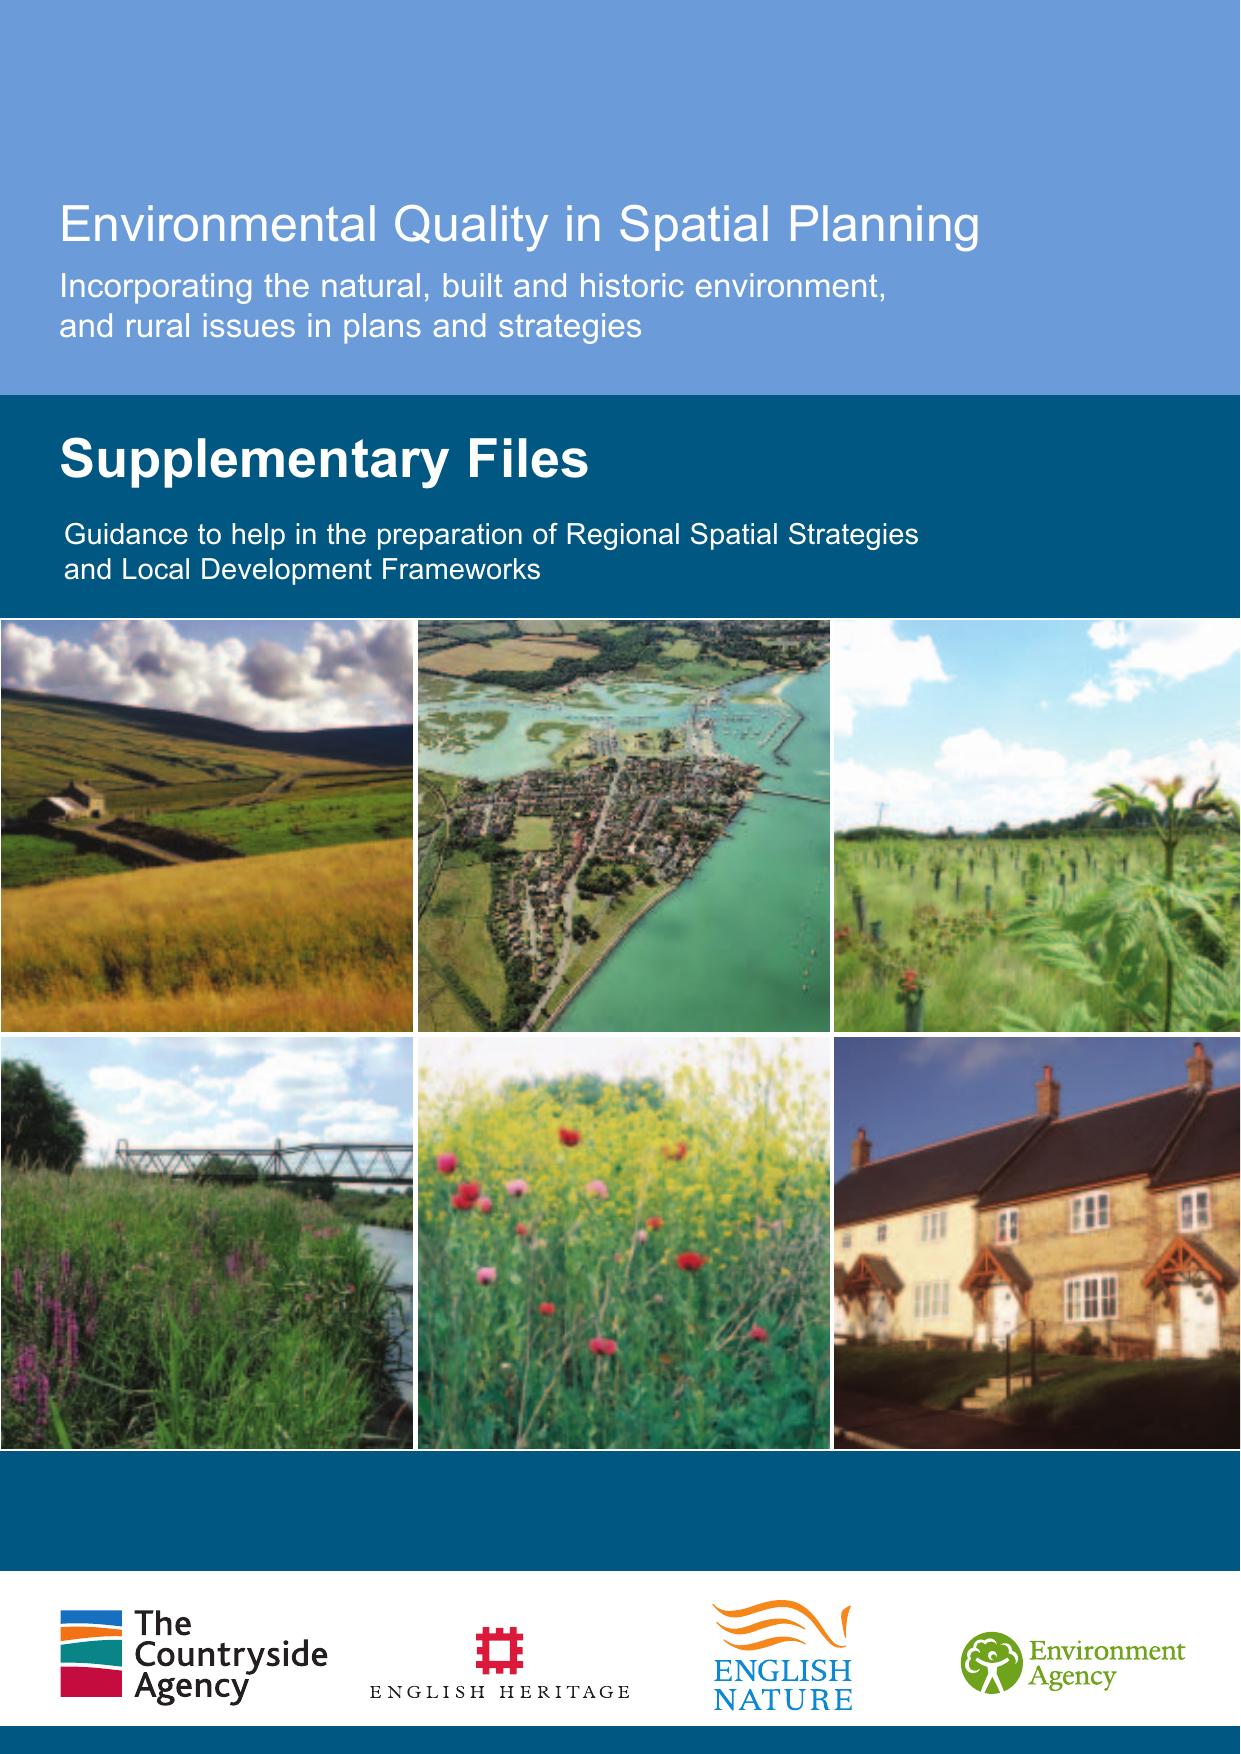 Environmental Quality in Spatial Planning - Supplementary Files